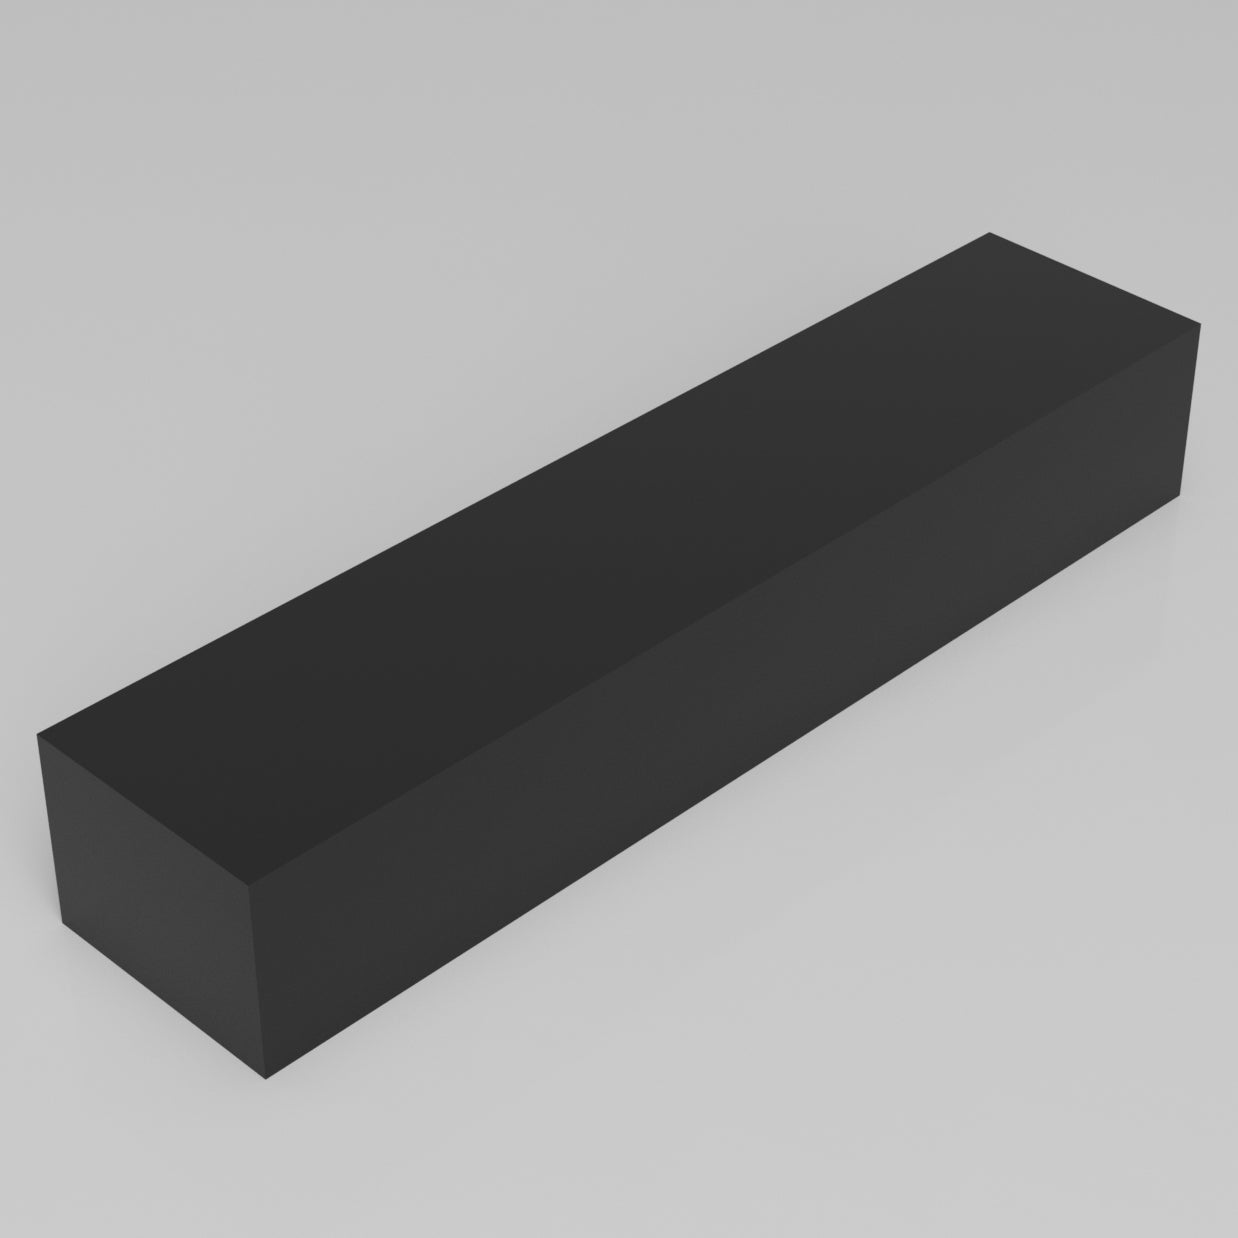 Machinable Wax Rectangular Block Front View 3 Inch by 4 Inch by 18 Inch